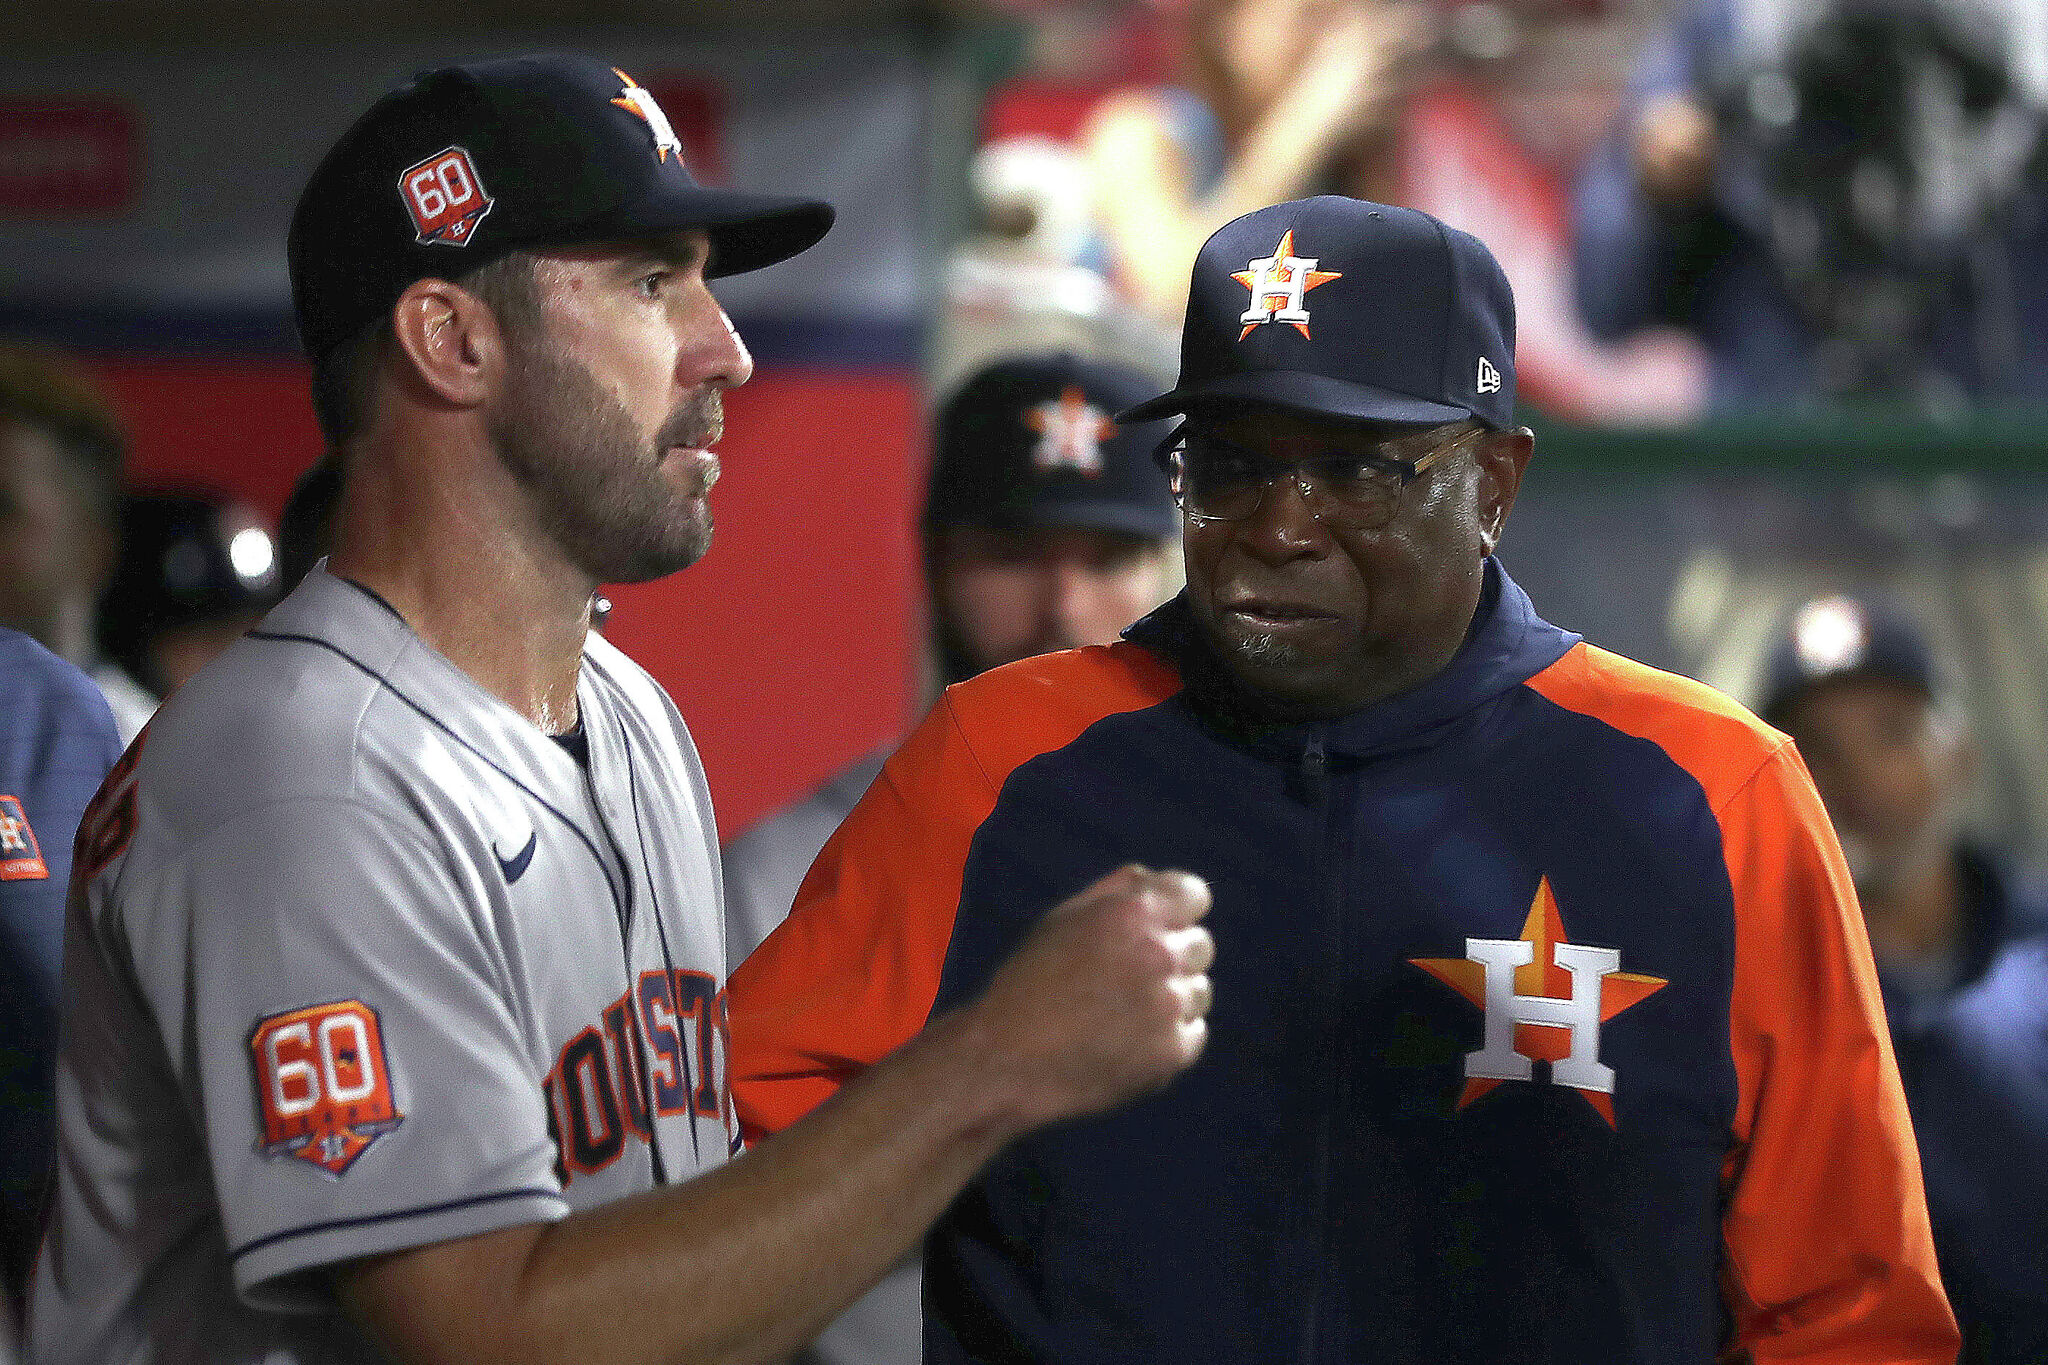 Houston Astros - Get to know the guys on the 40-man